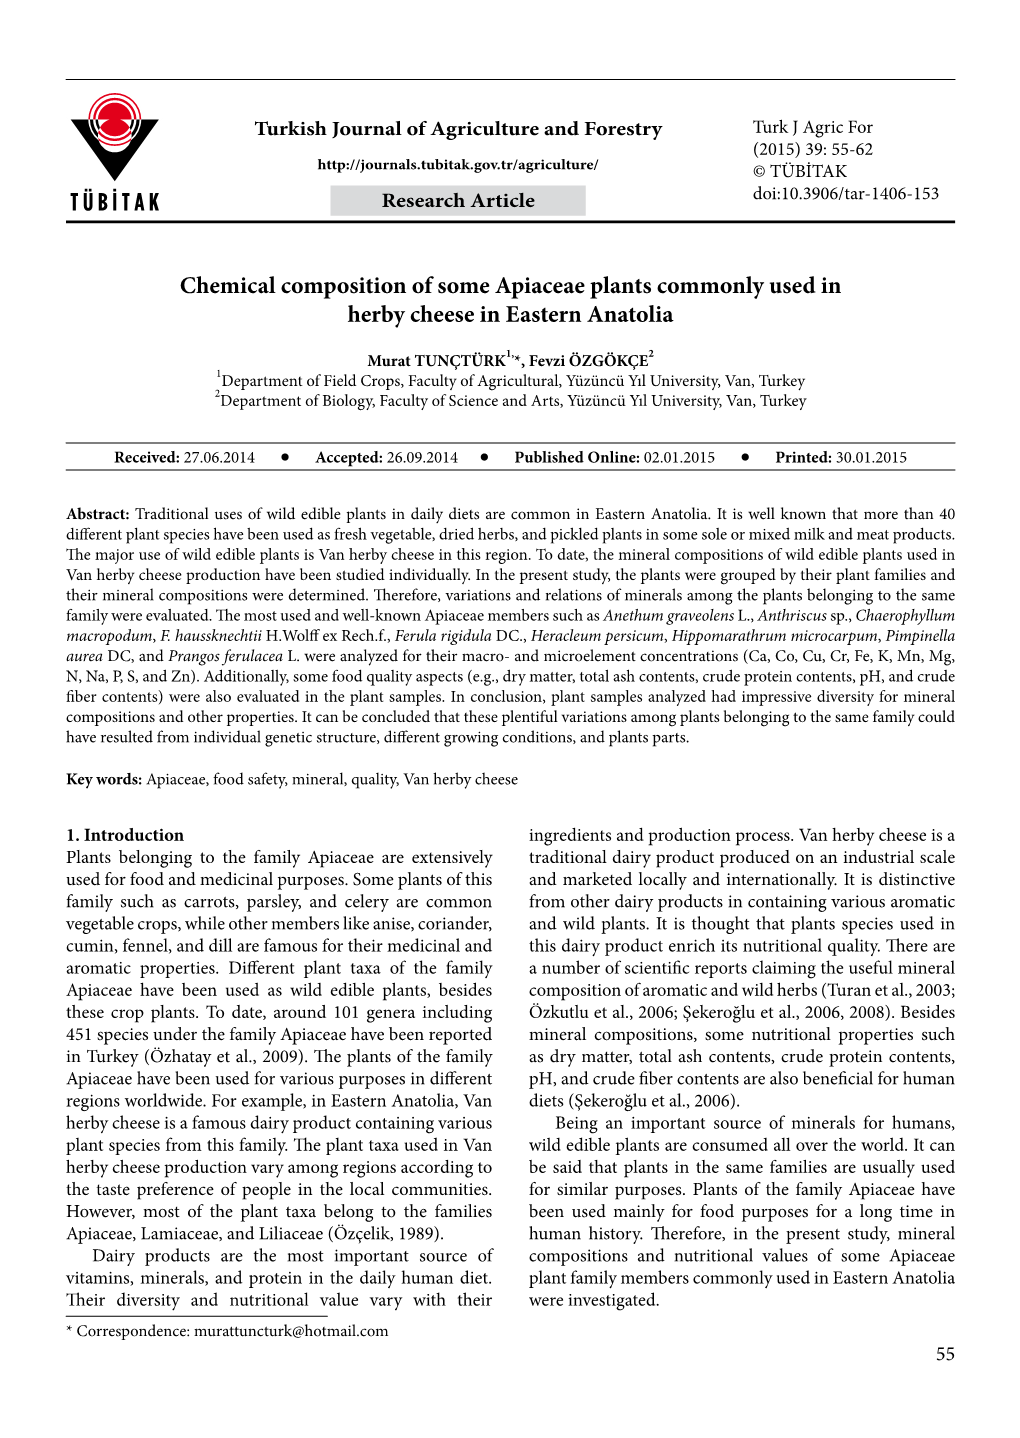 Chemical Composition of Some Apiaceae Plants Commonly Used in Herby Cheese in Eastern Anatolia